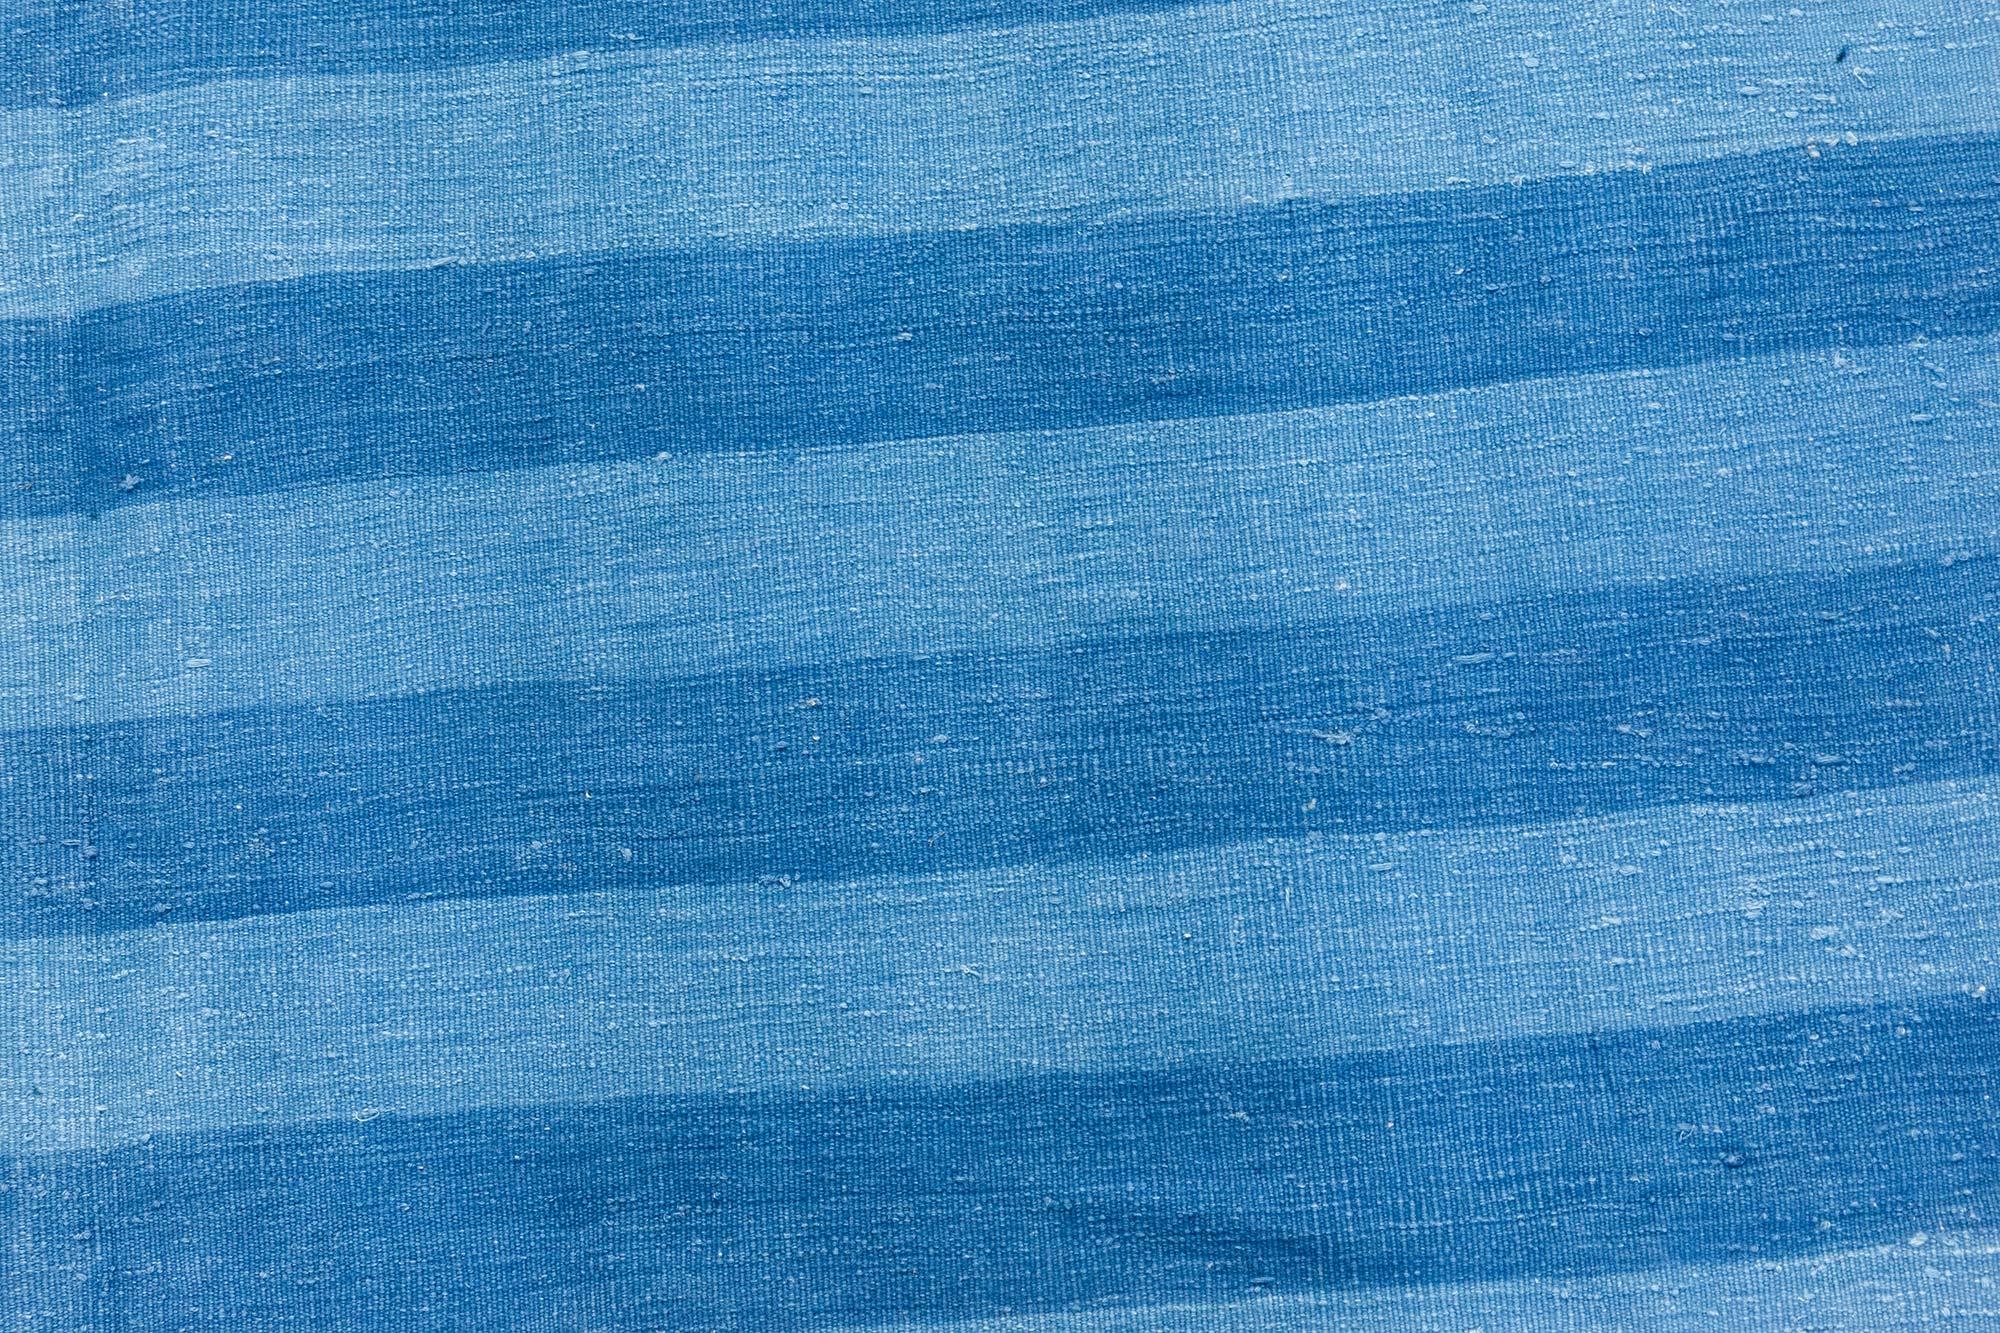 Mid-20th century blue striped Indian dhurrie cotton rug
Size: 13'7